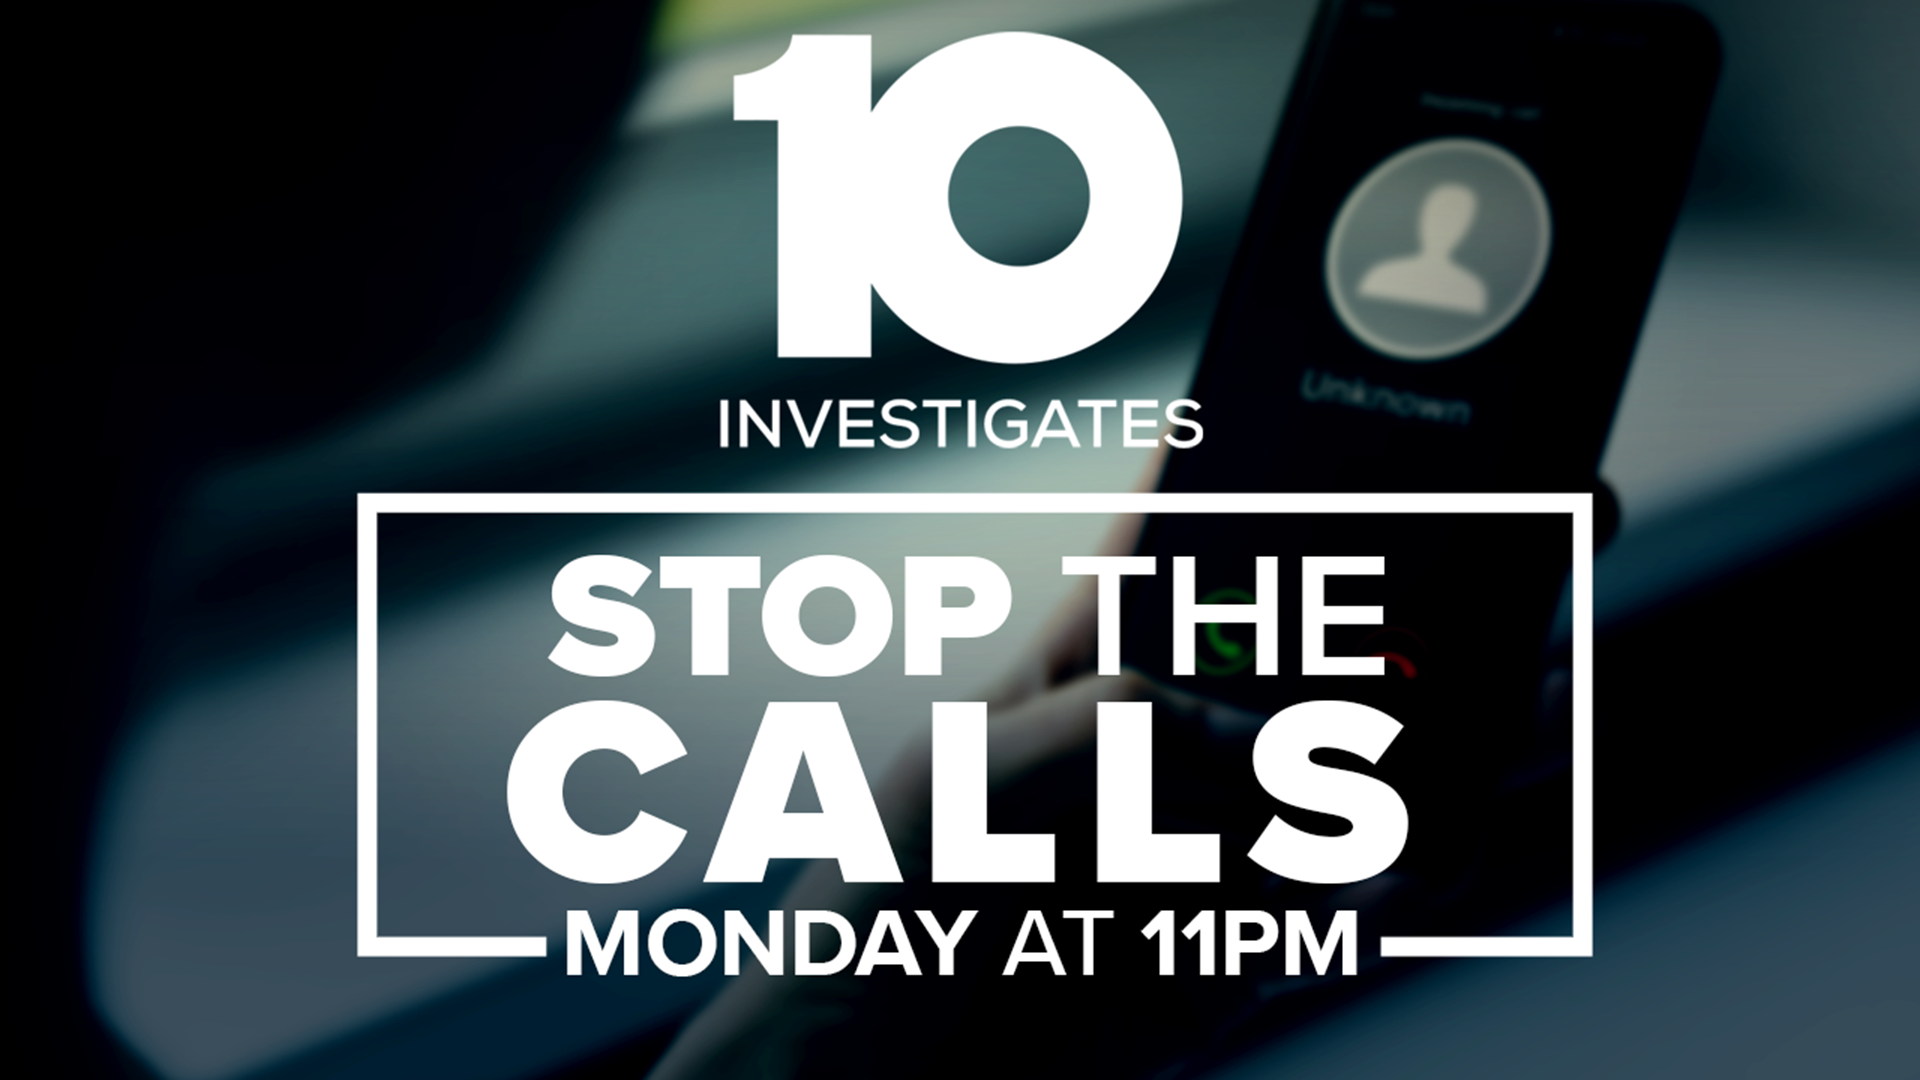 Monday at 11 p.m. ... 10 Investigates the insiders behind robocalls. Why it's so easy to wipe out someone's life savings and so hard for the law to stop them.